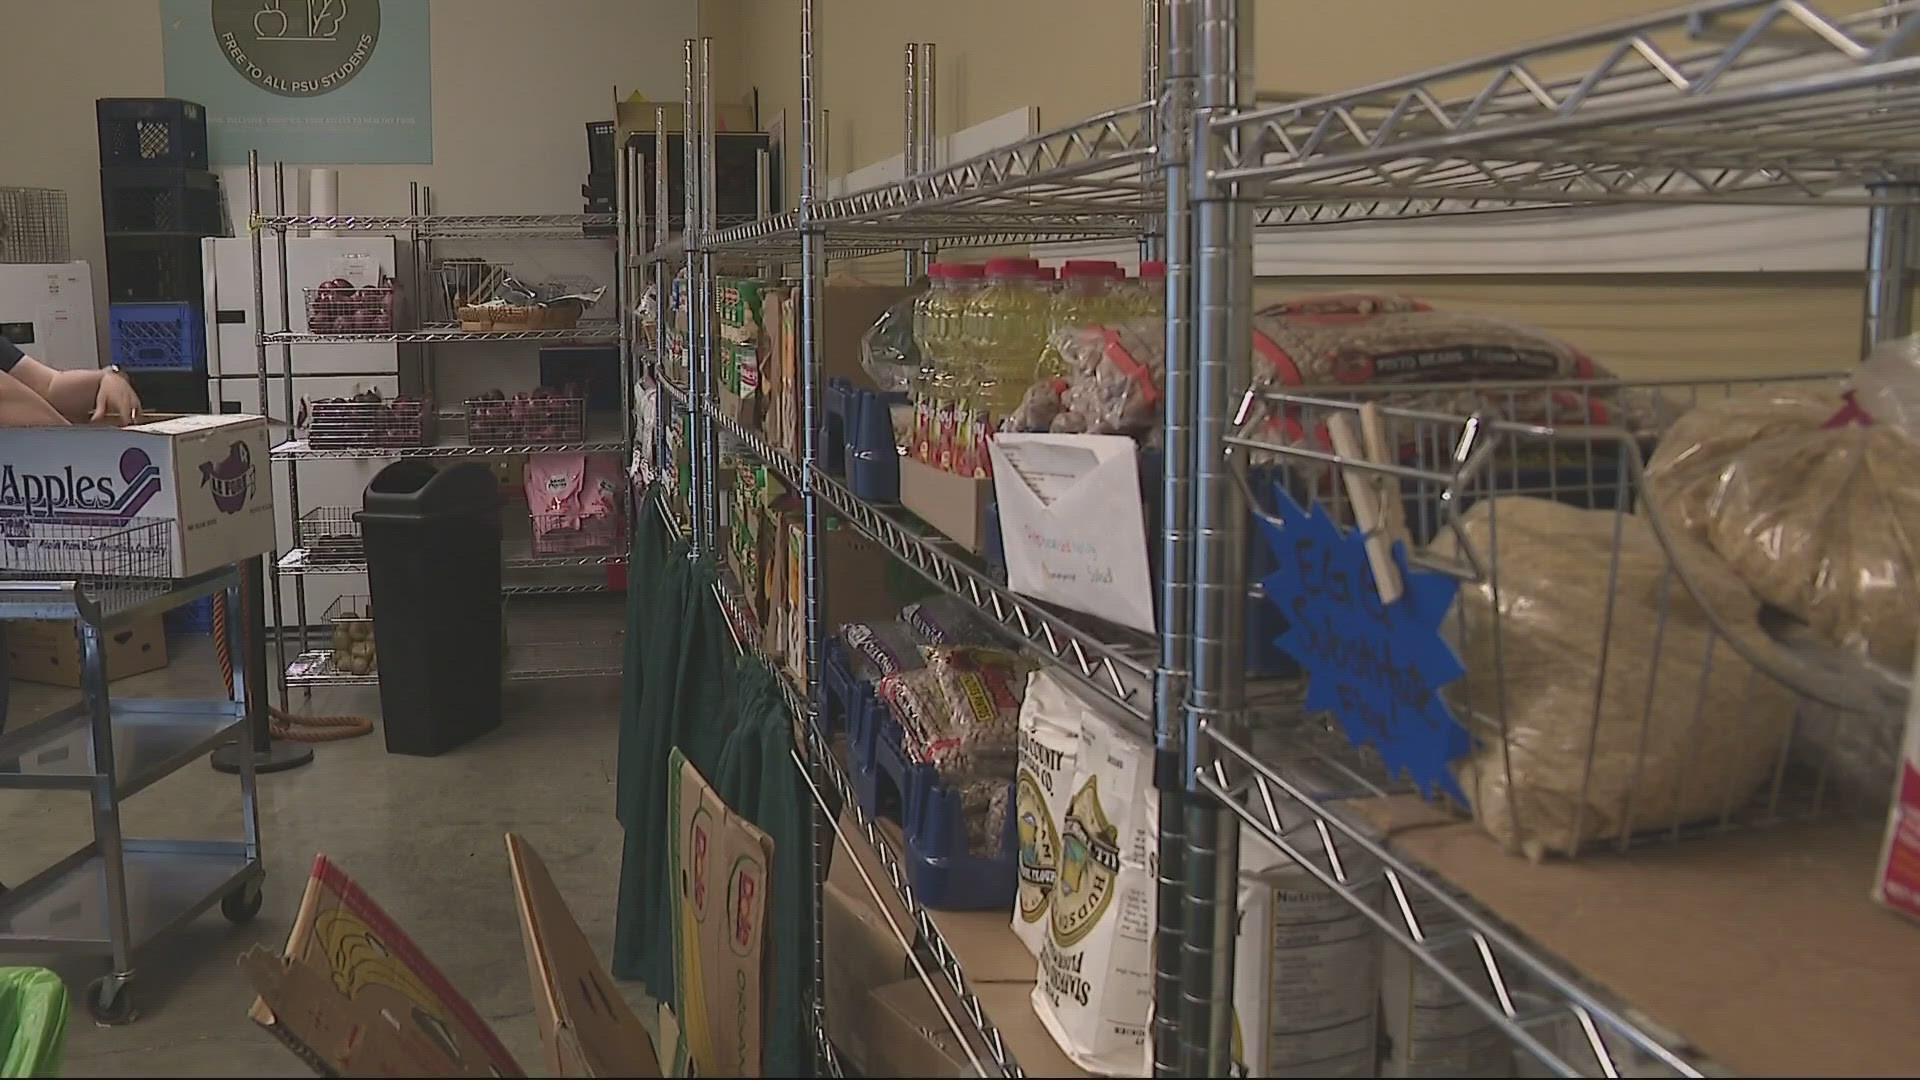 Portland State University's food pantry serves 115 students a day, and benefits from donations made to the KGW Great Food Drive.